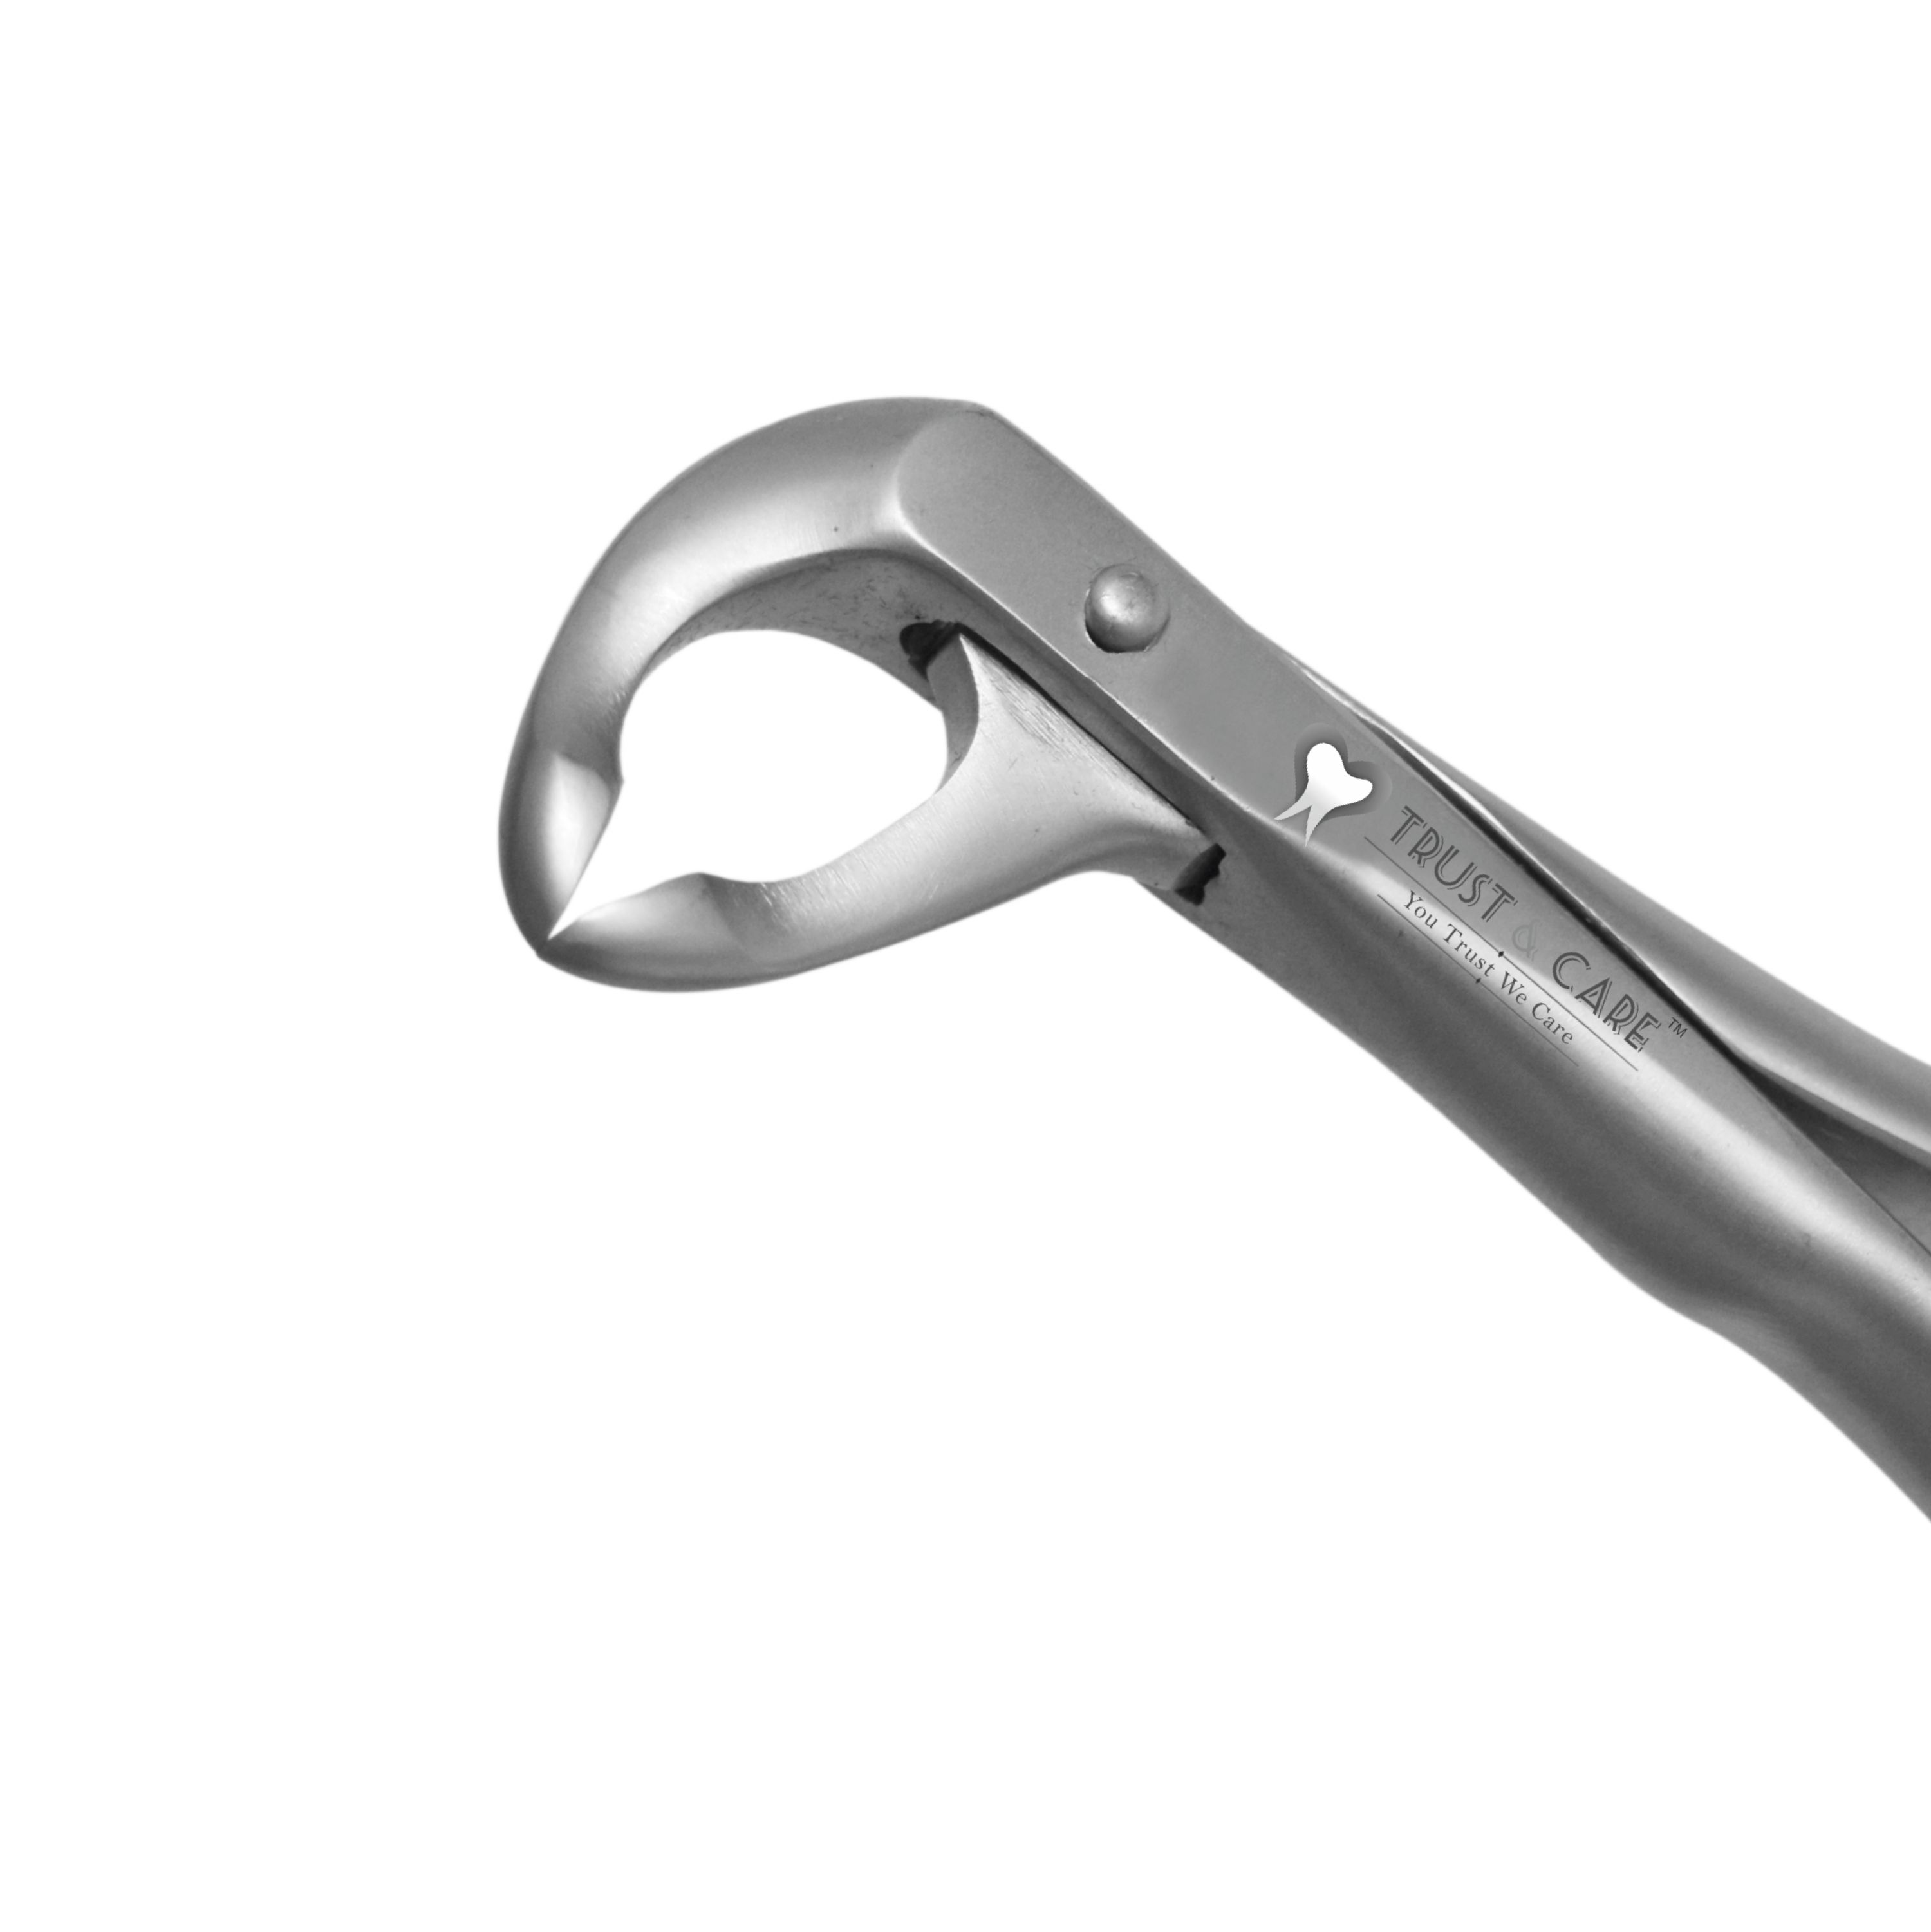 Trust & Care Secure Forcep Lower Roots Fig No. 974.00